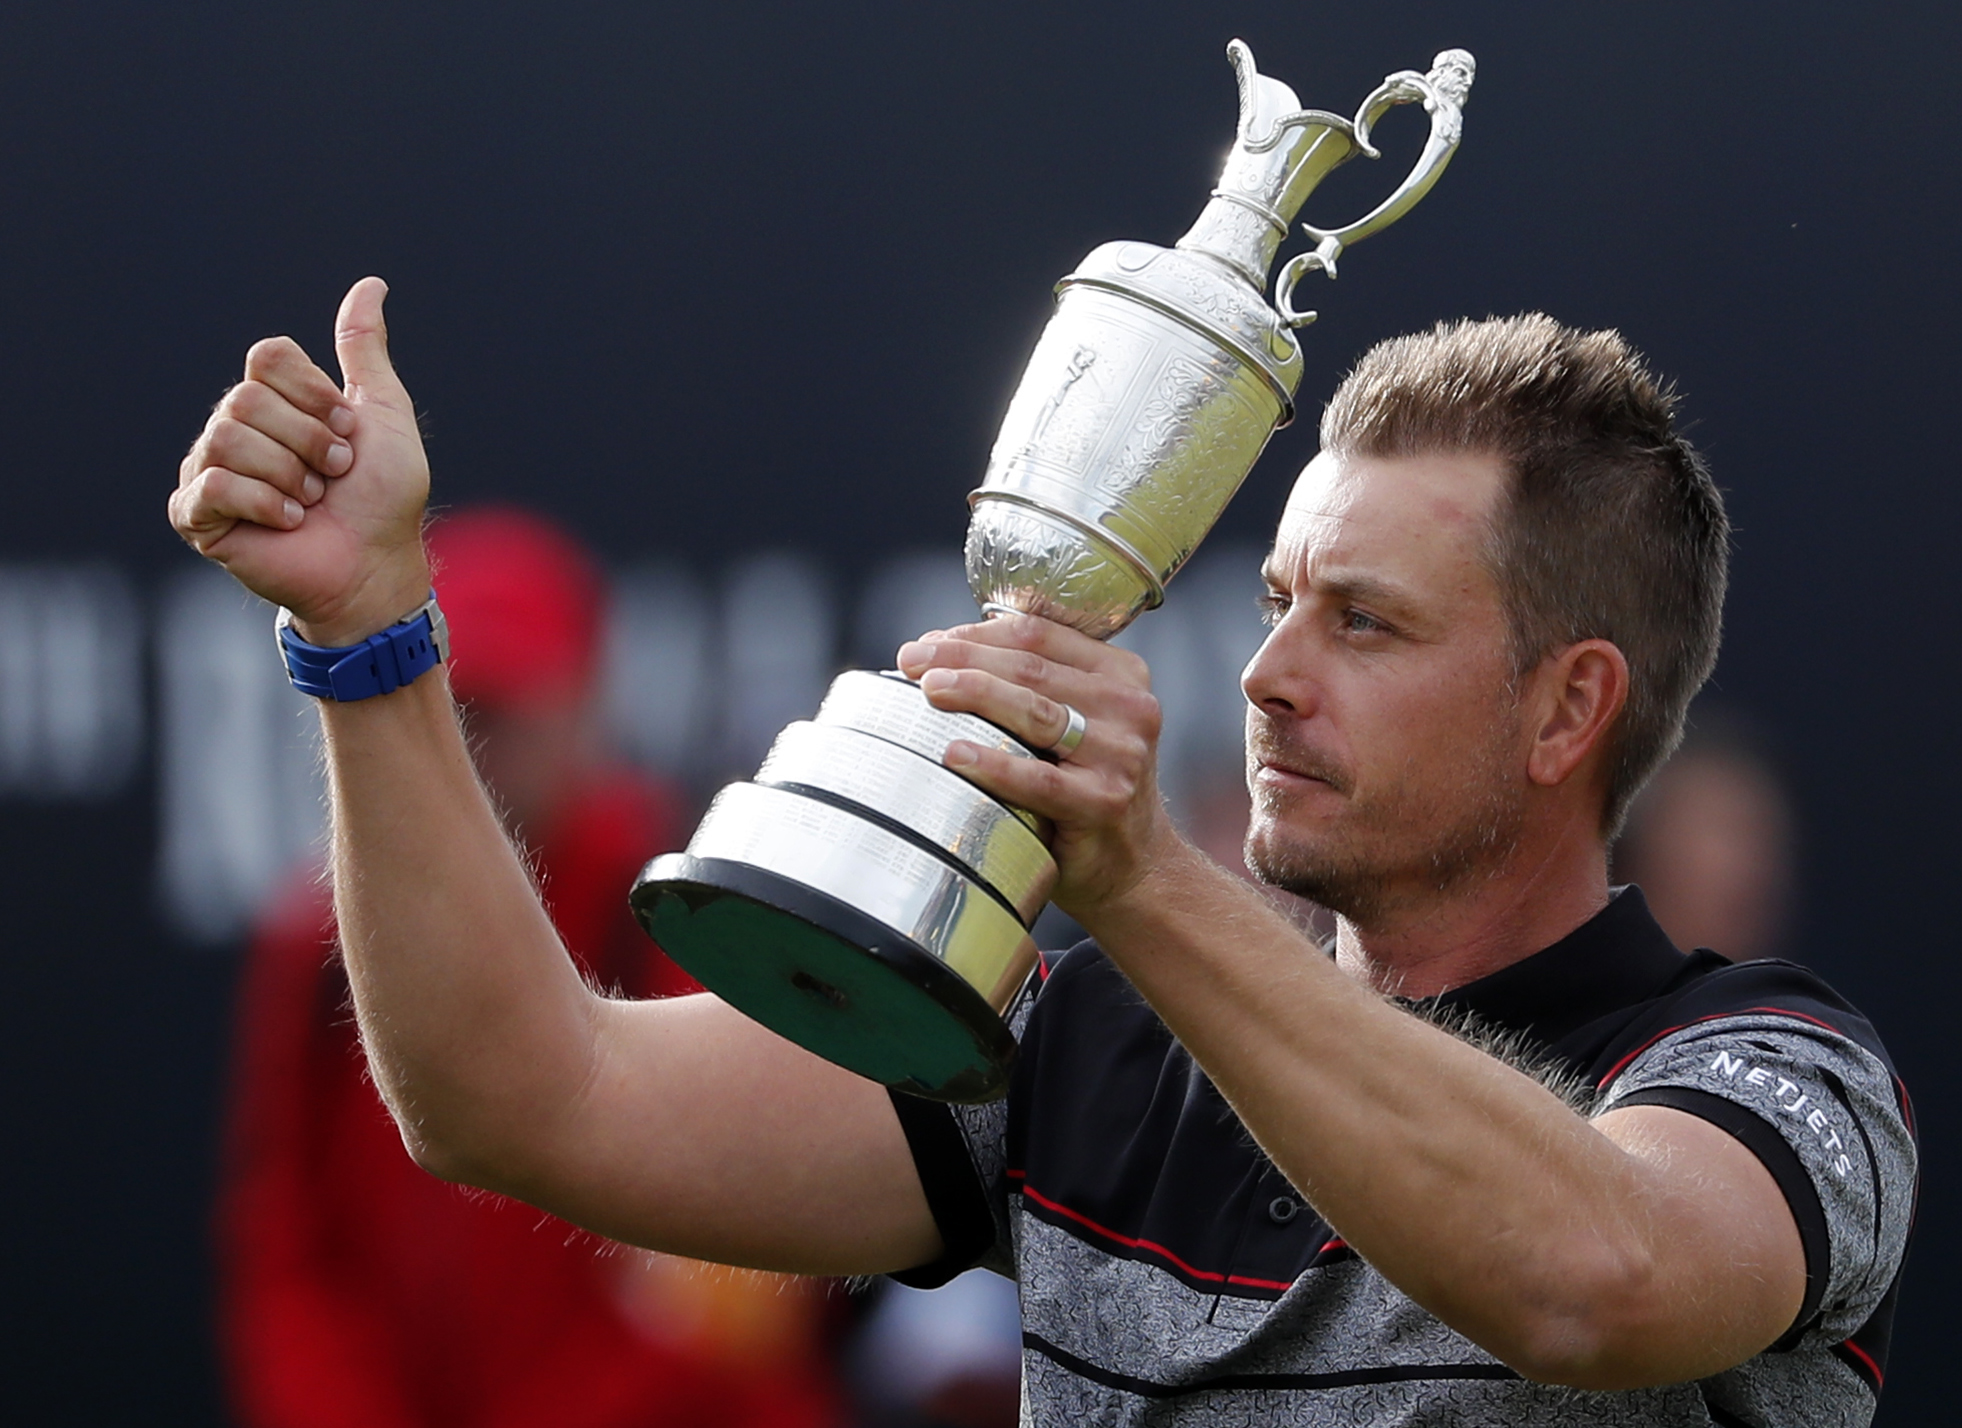 How 'Swede' It Is For Henrik Stenson, A Major Champion Like No Other